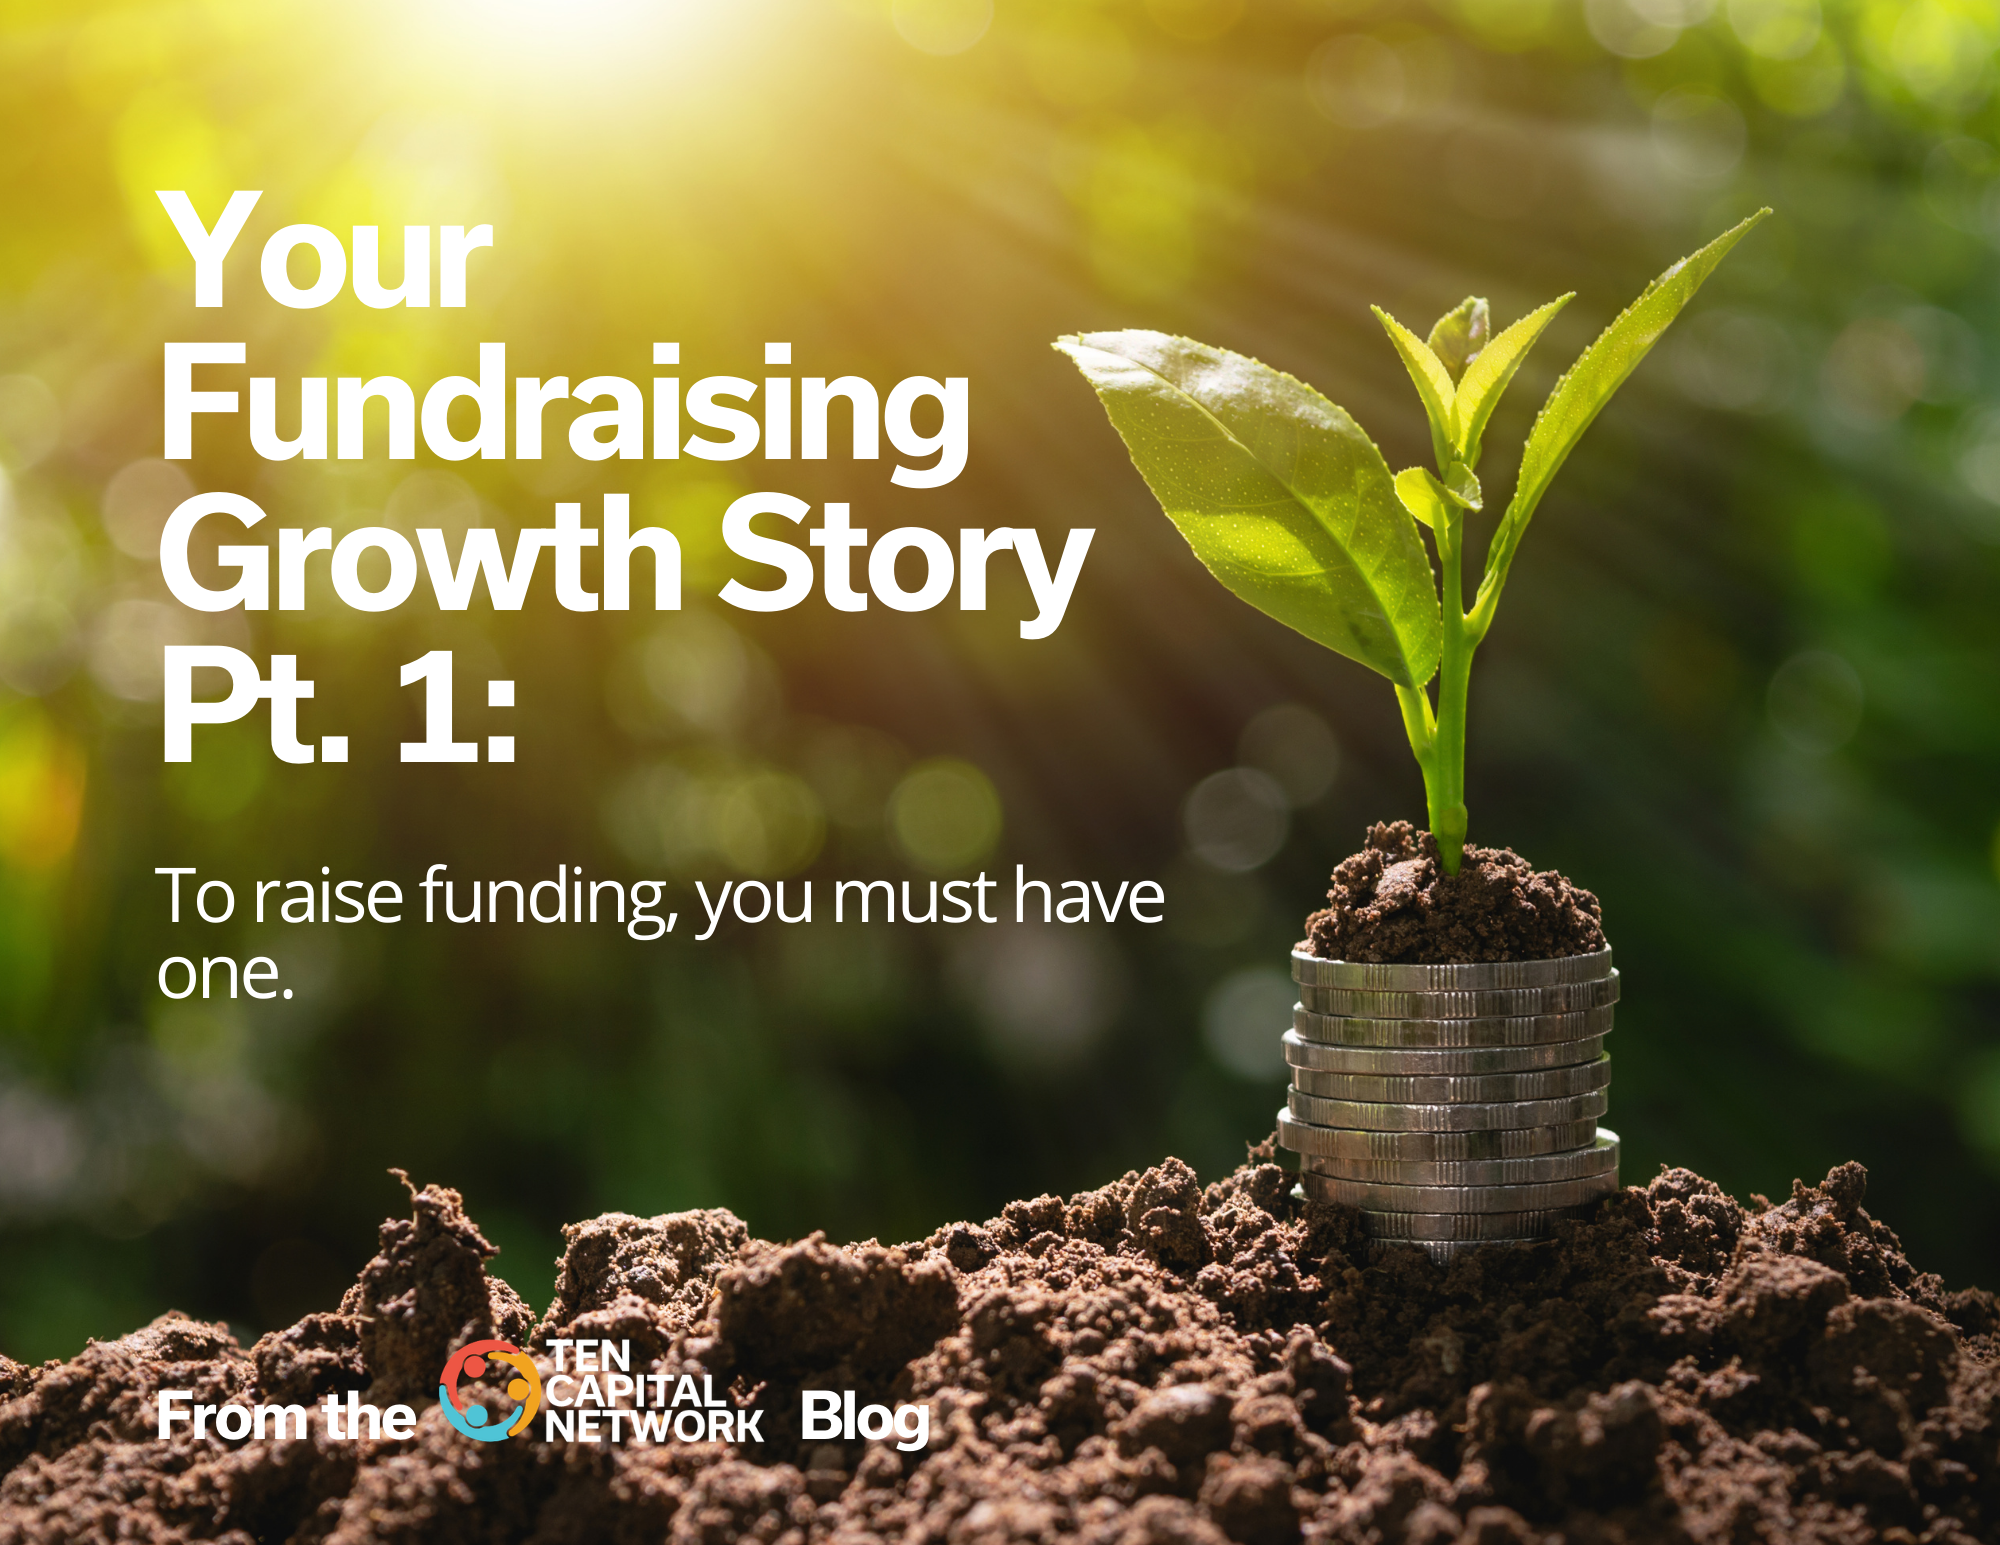 Your Fundraising Growth Story